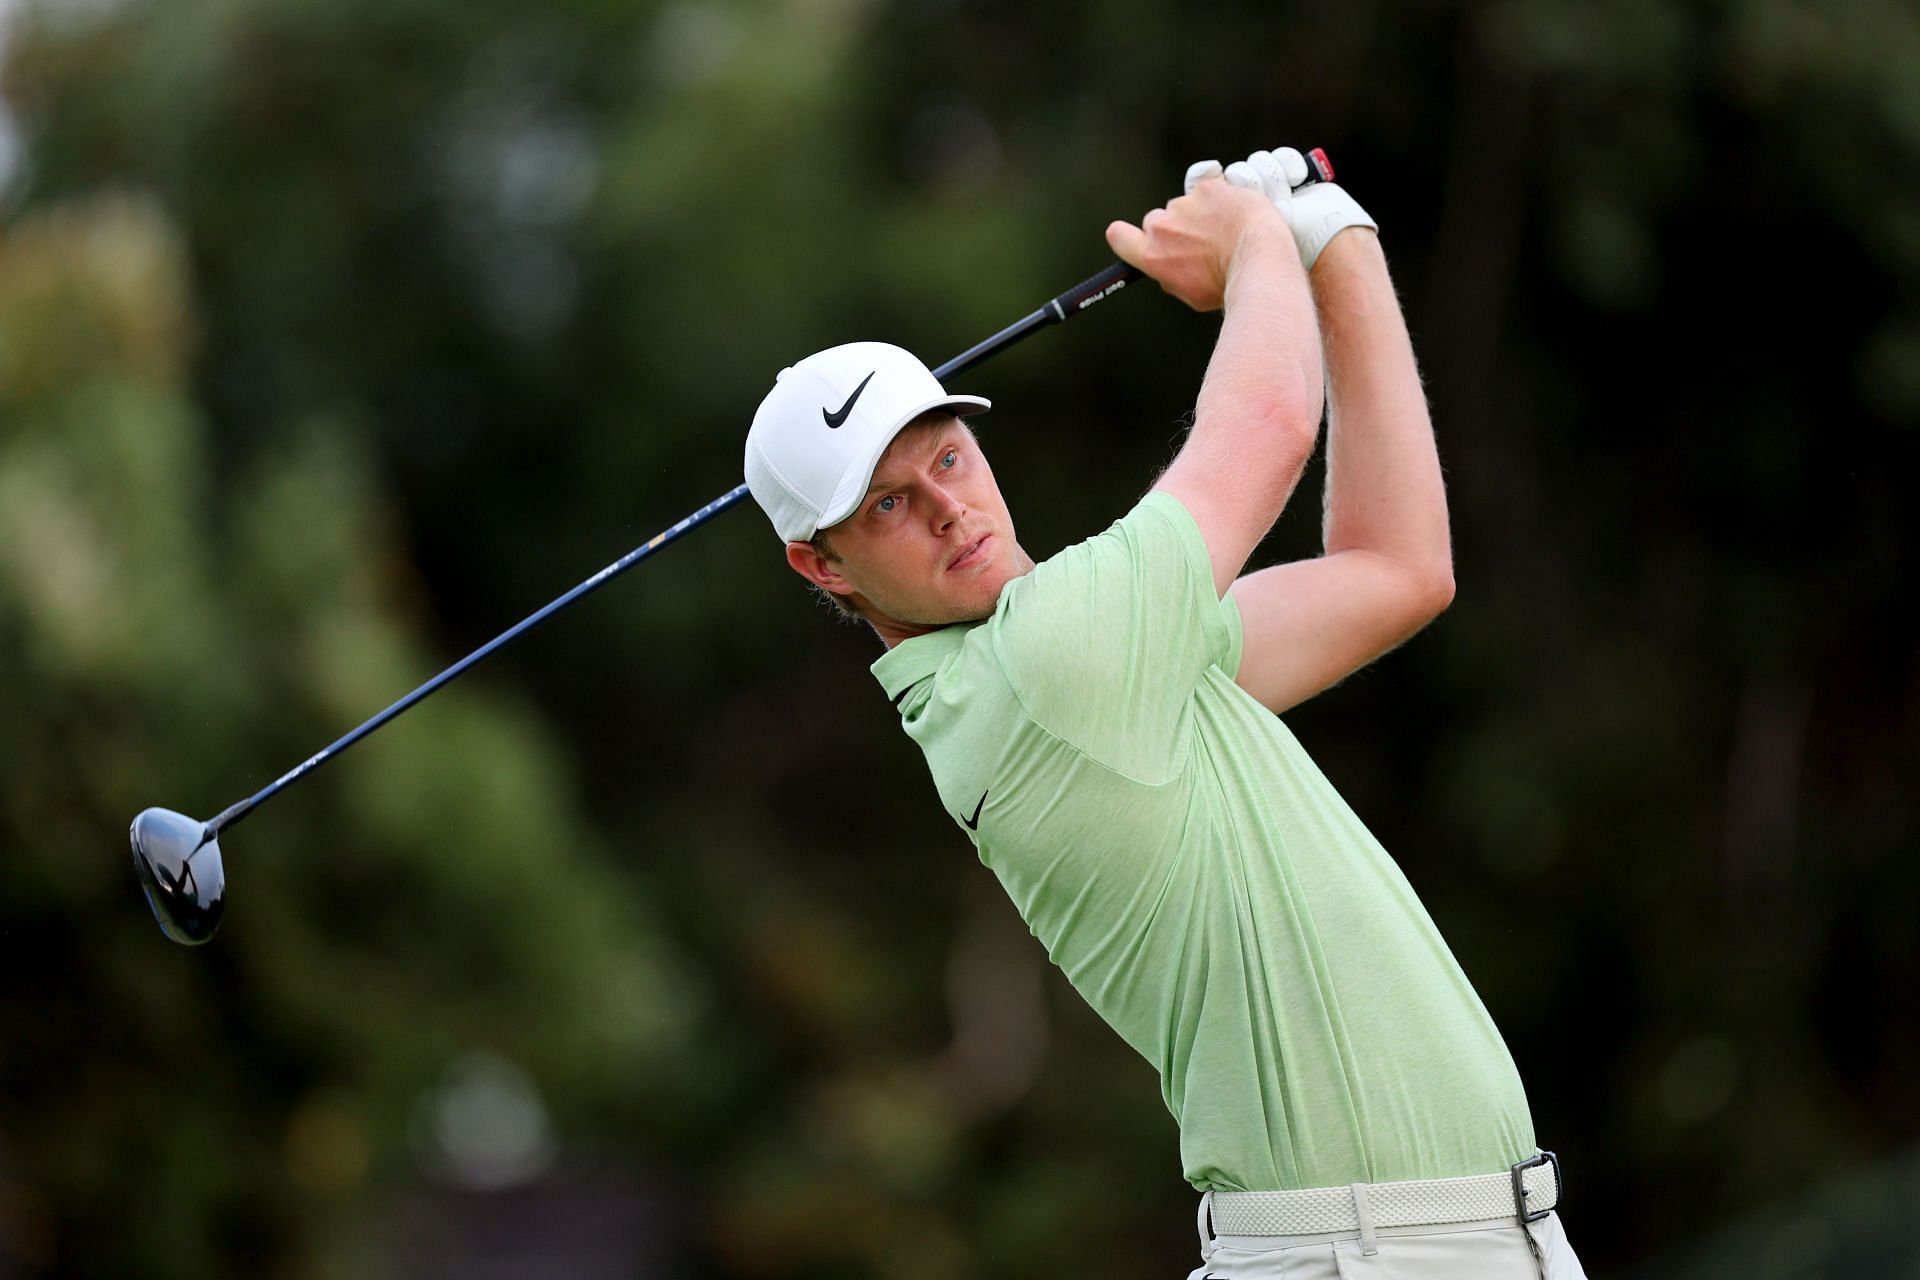 Who is leading the Sony Open in Hawaii after Day 1? Round 1 leaderboard